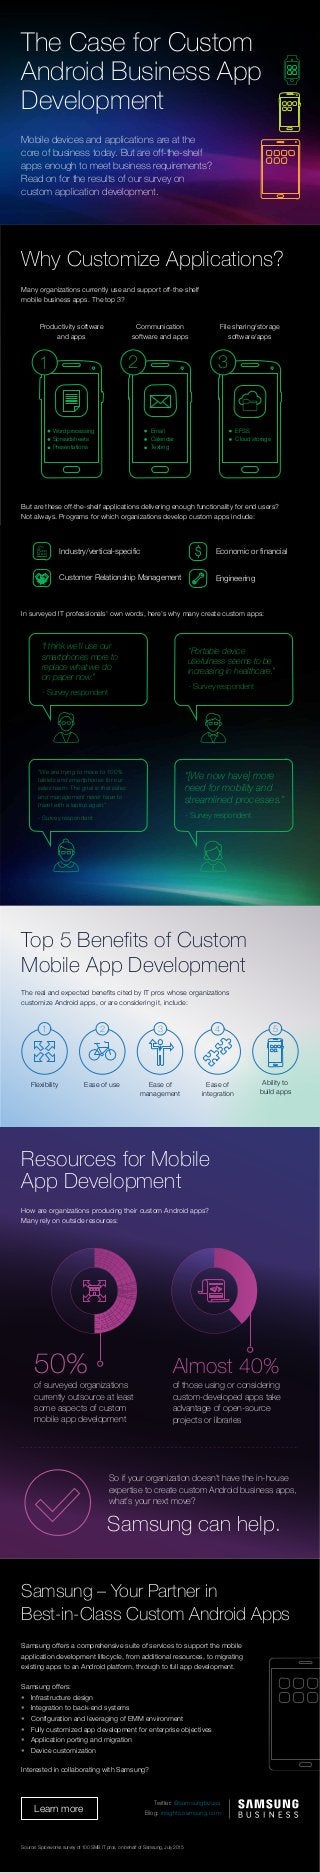 The Case for Custom
Android Business App
Development
Mobile devices and applications are at the
core of business today. But are off-the-shelf
apps enough to meet business requirements?
Read on for the results of our survey on
custom application development.
Why Customize Applications?
Many organizations currently use and support off-the-shelf
mobile business apps. The top 3?
1
Productivity software
and apps
2
Communication
software and apps
3
File sharing/storage
software/apps
Word processing
Spreadsheets
Presentations
Email
Calendar
Texting
EFSS
Cloud storage
But are these off-the-shelf applications delivering enough functionality for end users?
Not always. Programs for which organizations develop custom apps include:
Industry/vertical-specific Economic or financial
Customer Relationship Management Engineering
Top 5 Benefits of Custom
Mobile App Development
The real and expected benefits cited by IT pros whose organizations
customize Android apps, or are considering it, include:
Flexibility Ease of use Ease of
management
Ease of
integration
Ability to
build apps
1 2 3 4 5
Resources for Mobile
App Development
How are organizations producing their custom Android apps?
Many rely on outside resources:
50%
of surveyed organizations
currently outsource at least
some aspects of custom
mobile app development
Almost 40%
of those using or considering
custom-developed apps take
advantage of open-source
projects or libraries
So if your organization doesn’t have the in-house
expertise to create custom Android business apps,
what’s your next move?
Samsung can help.
Samsung – Your Partner in
Best-in-Class Custom Android Apps
Samsung offers a comprehensive suite of services to support the mobile
application development lifecycle, from additional resources, to migrating
existing apps to an Android platform, through to full app development.
Samsung offers:
• Infrastructure design
• Integration to back-end systems
• Configuration and leveraging of EMM environment
• Fully customized app development for enterprise objectives
• Application porting and migration
• Device customization
Interested in collaborating with Samsung?
Learn more
Source: Spiceworks survey of 100 SMB IT pros, on behalf of Samsung, July 2015
In surveyed IT professionals' own words, here's why many create custom apps:
“I think we'll use our
smartphones more to
replace what we do
on paper now.”
- Survey respondent
“Portable device
usefulness seems to be
increasing in healthcare.”
- Survey respondent
“We are trying to move to 100%
tablets and smartphones for our
sales team. The goal is that sales
and management never have to
travel with a laptop again.”
- Survey respondent
“[We now have] more
need for mobility and
streamlined processes.”
- Survey respondent
Twitter: @samsungbizusa
Blog: insights.samsung.com
 